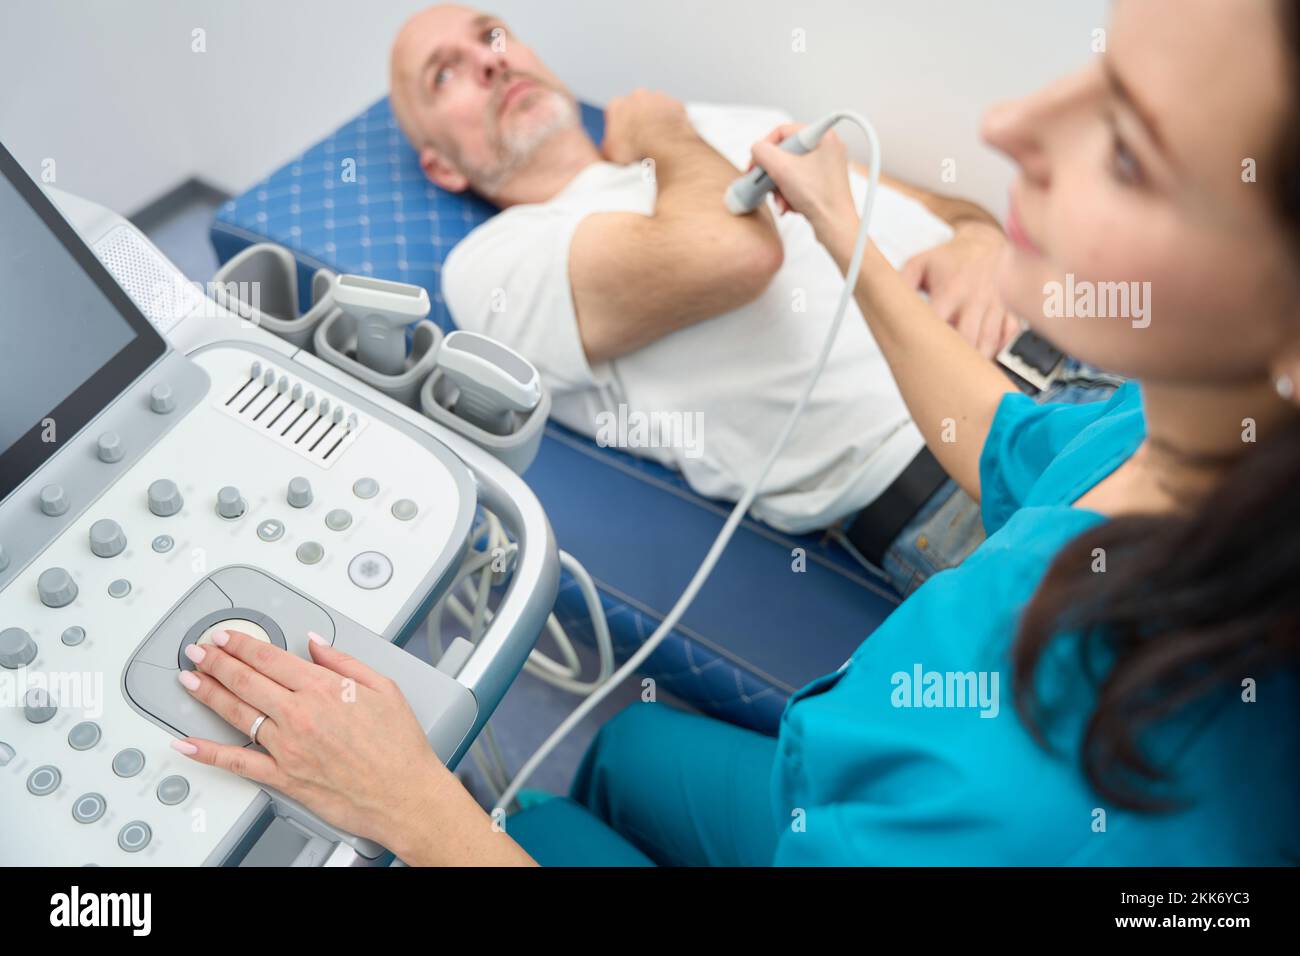 Woman performing ultrasound examination of elbow joint to a man Stock Photo